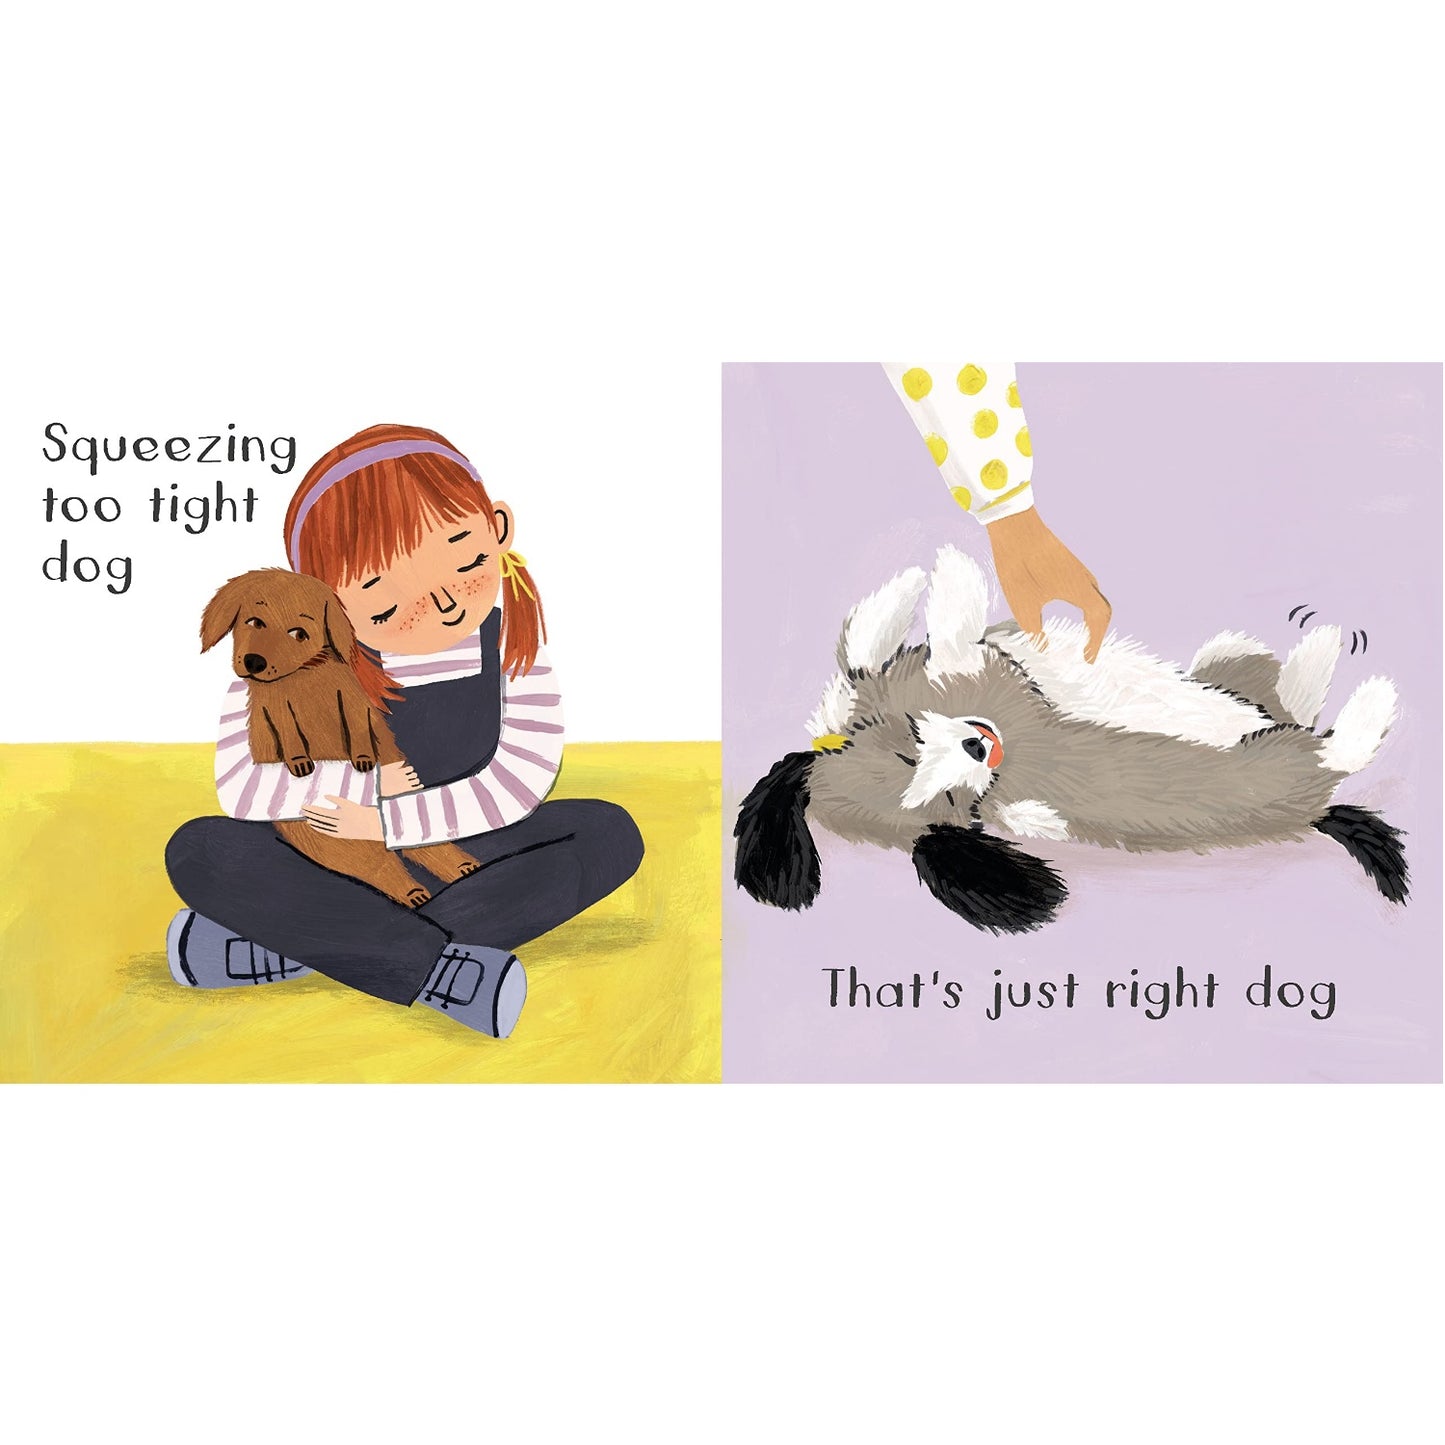 Puppy Talk: How Dogs Tell Us How They Feel | Board Book